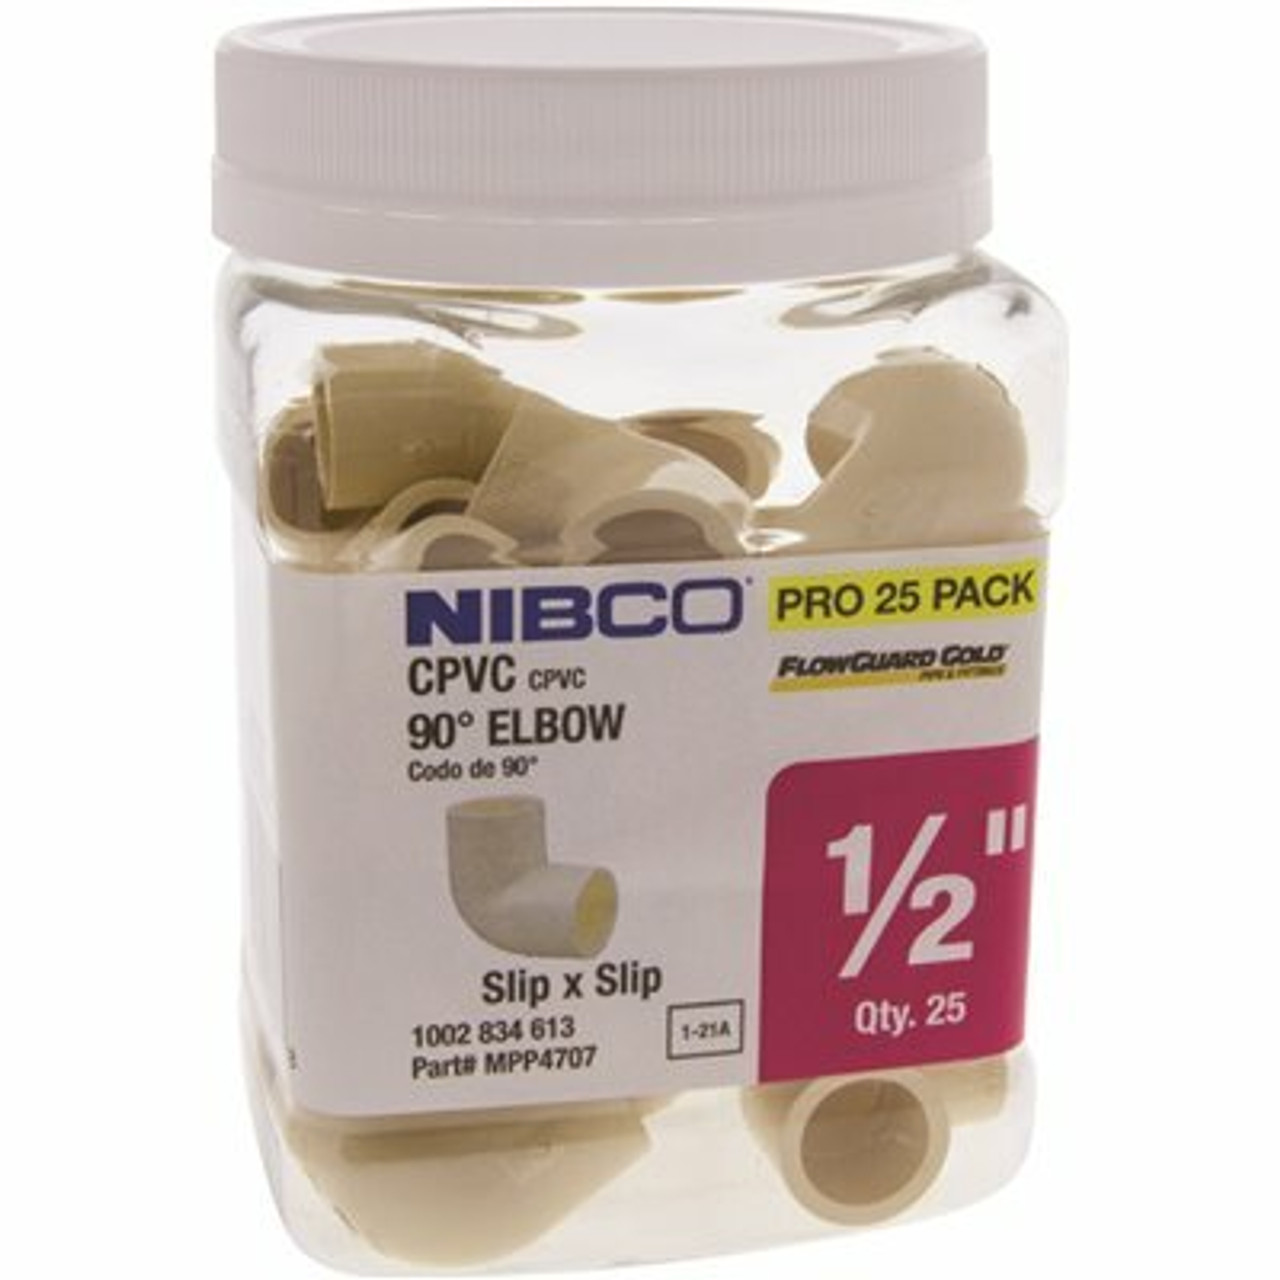 Nibco 1/2 In. Cpvc-Cts Slip X Slip 90 Elbow Fitting Pro Pack (25-Pack)